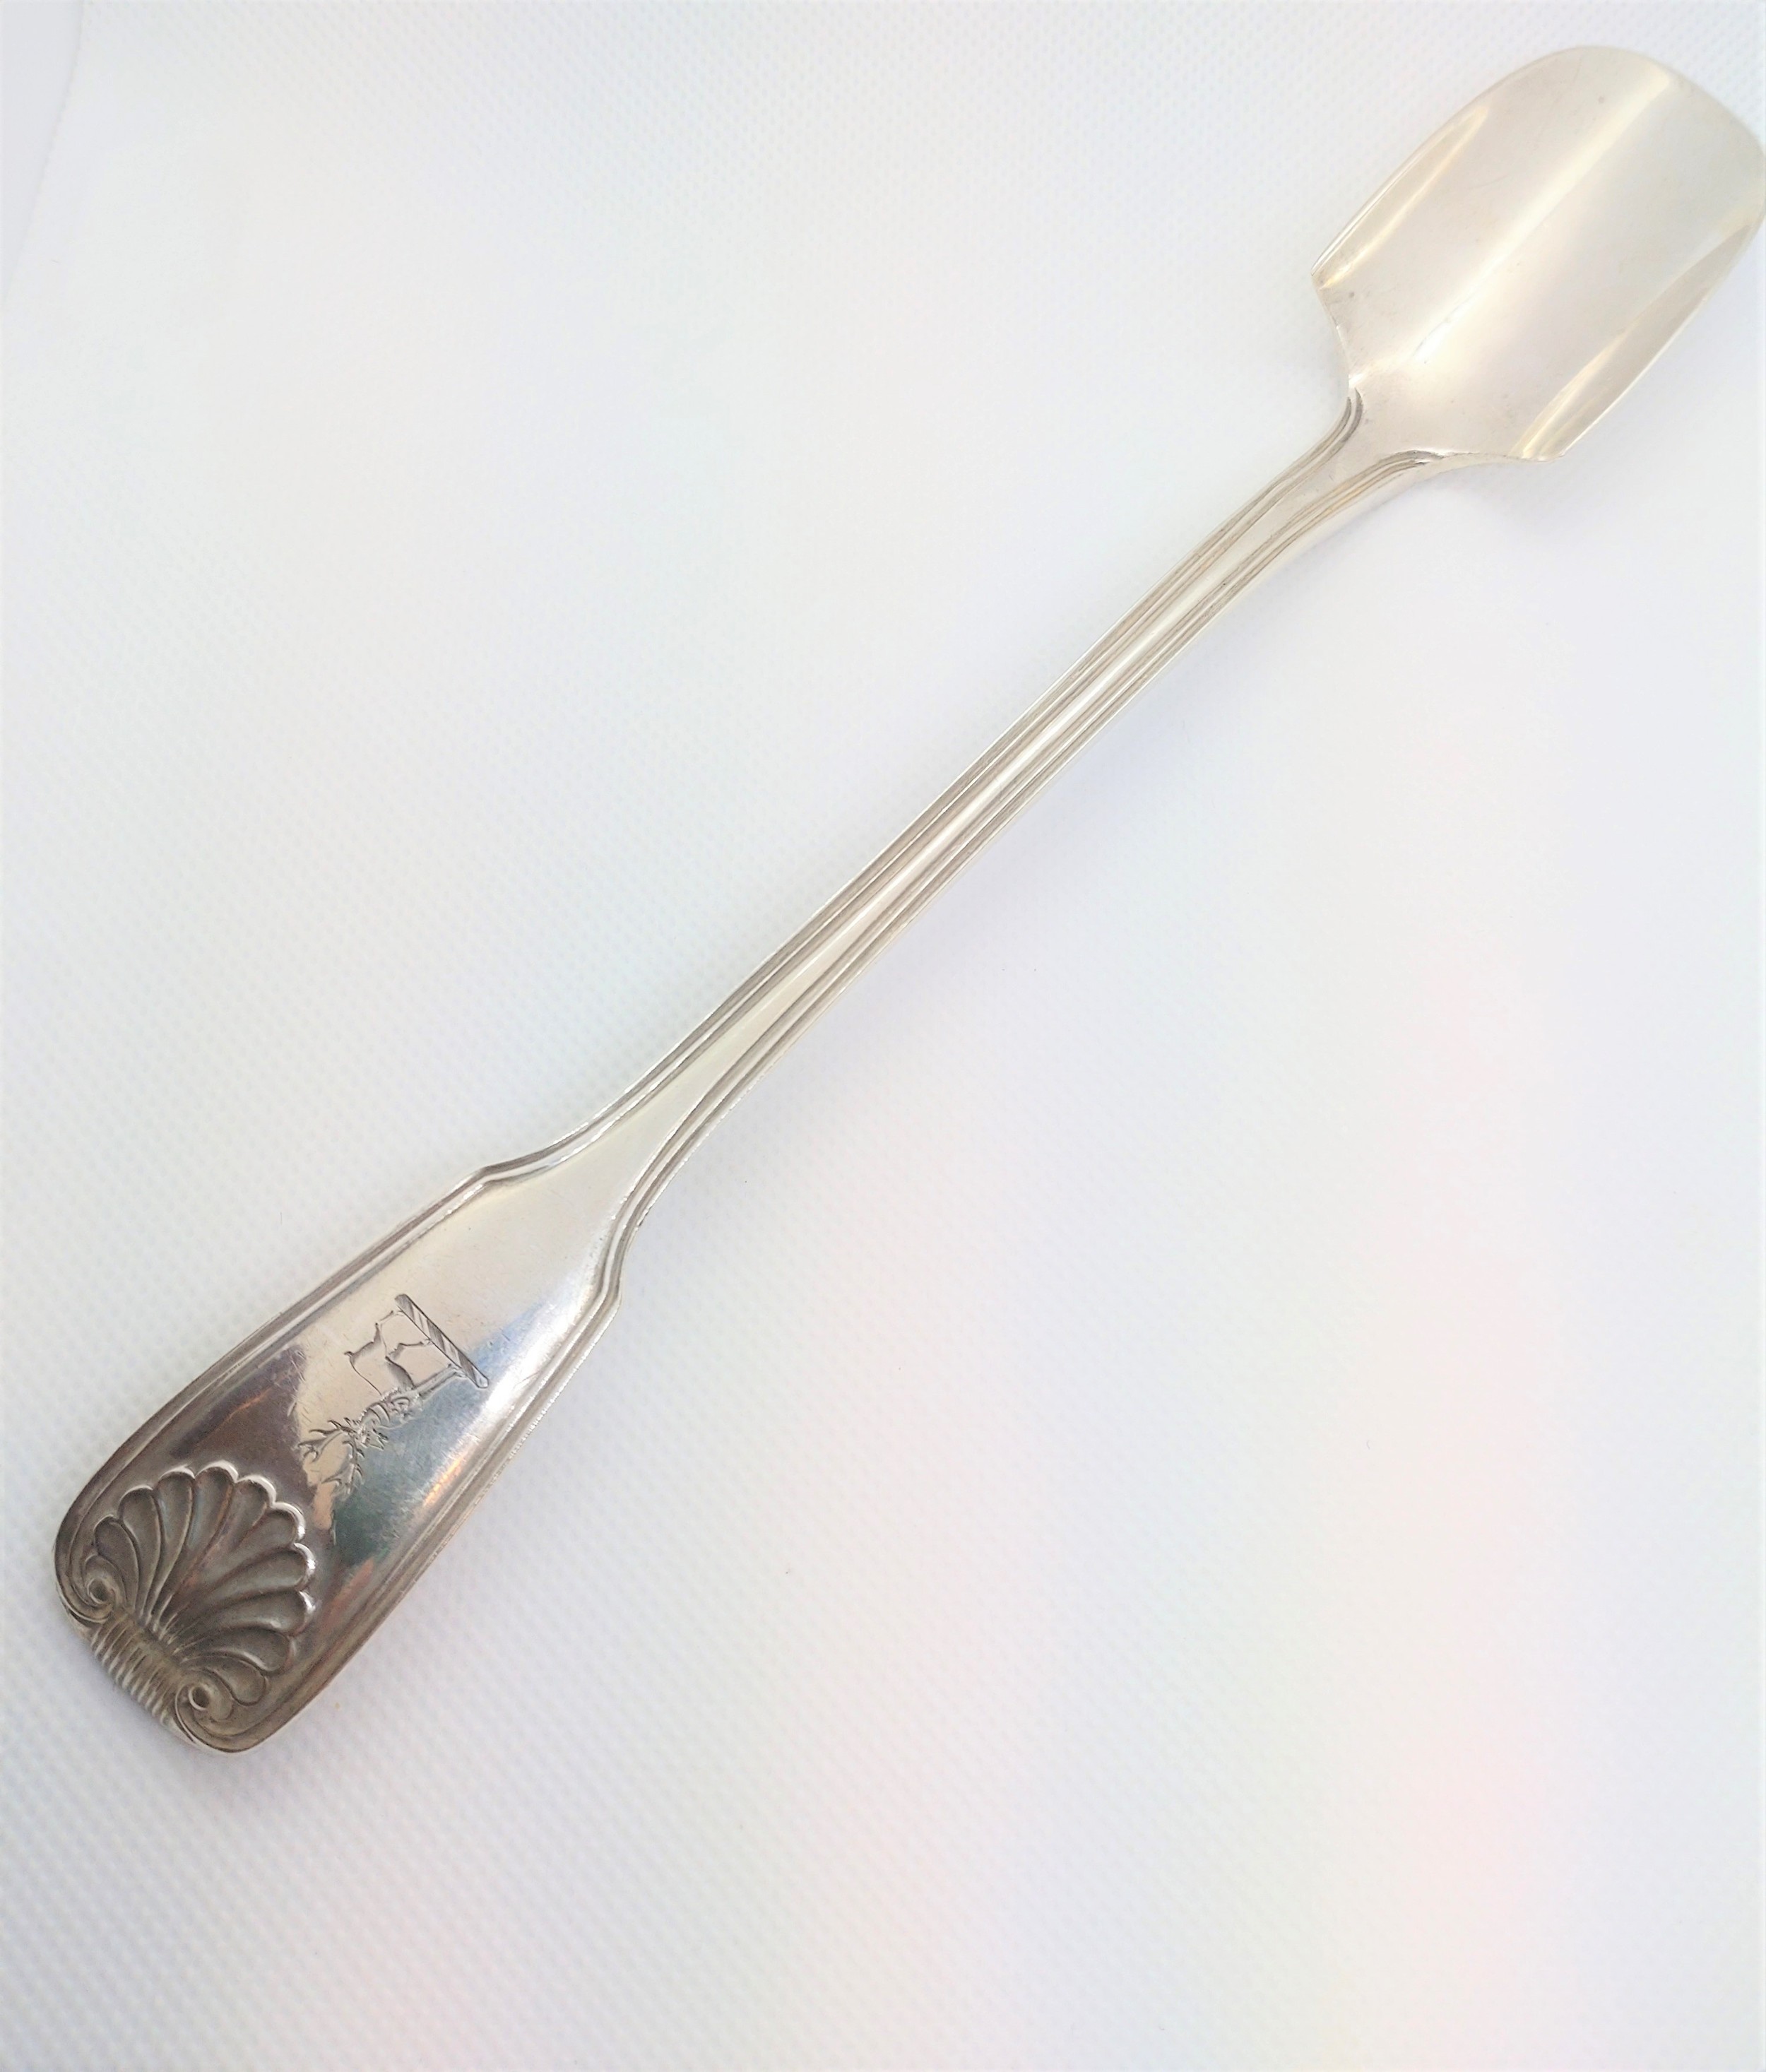 A Victorian sterling silver fiddle thread and shell cheese scoop. George Adams, London 1872.